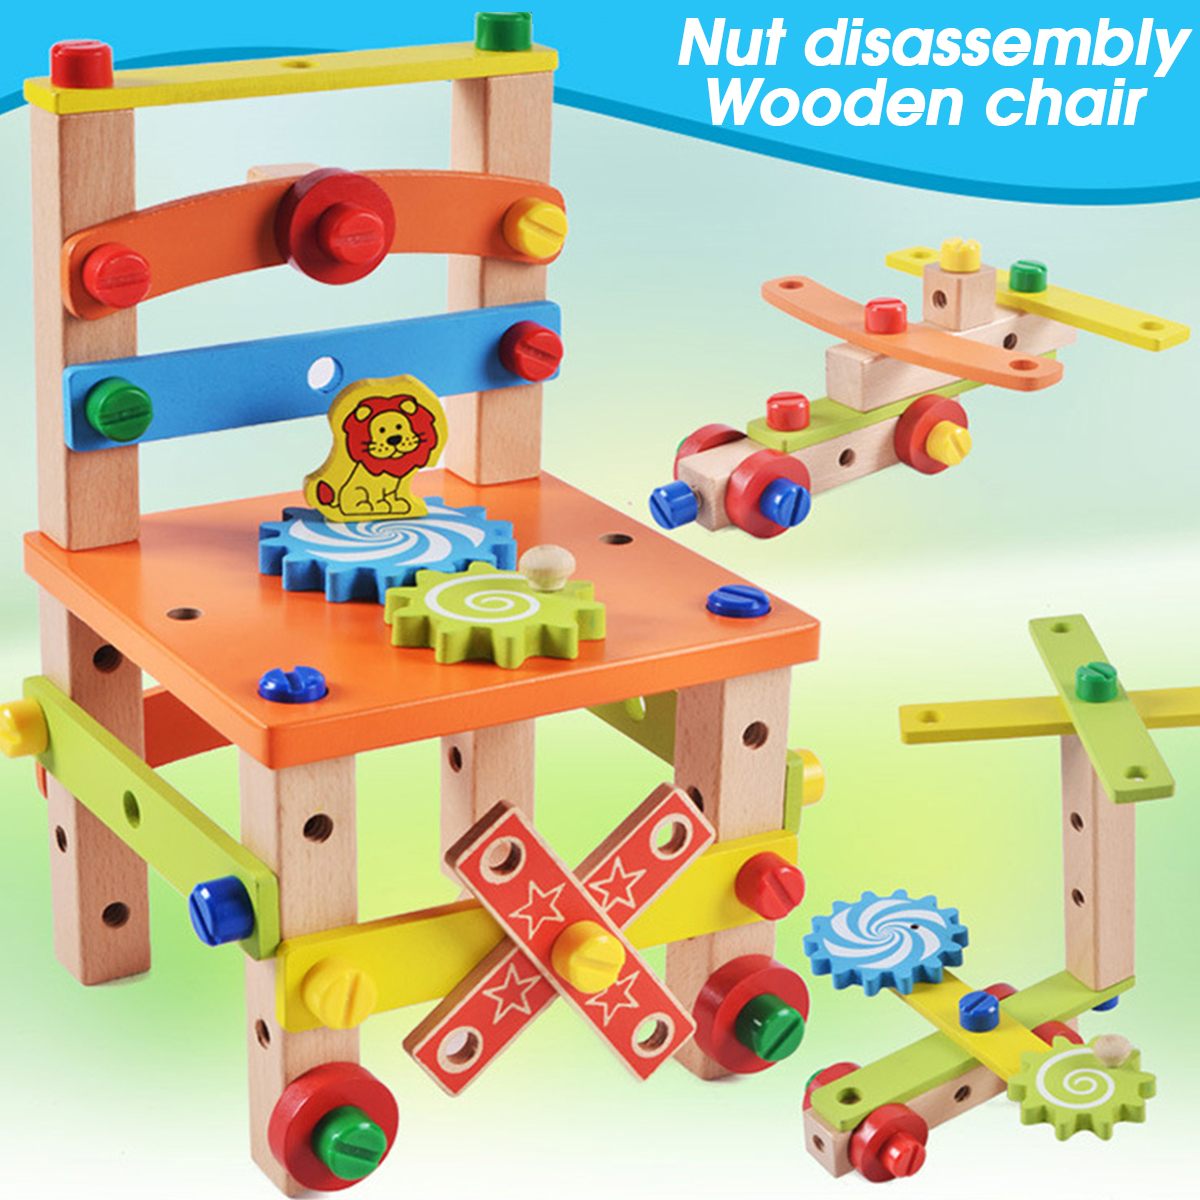 DIY-Creative-Toy-Multi-function-Nut-Disassembly-Combination-Toy-Wooden-Chair-1690769-1